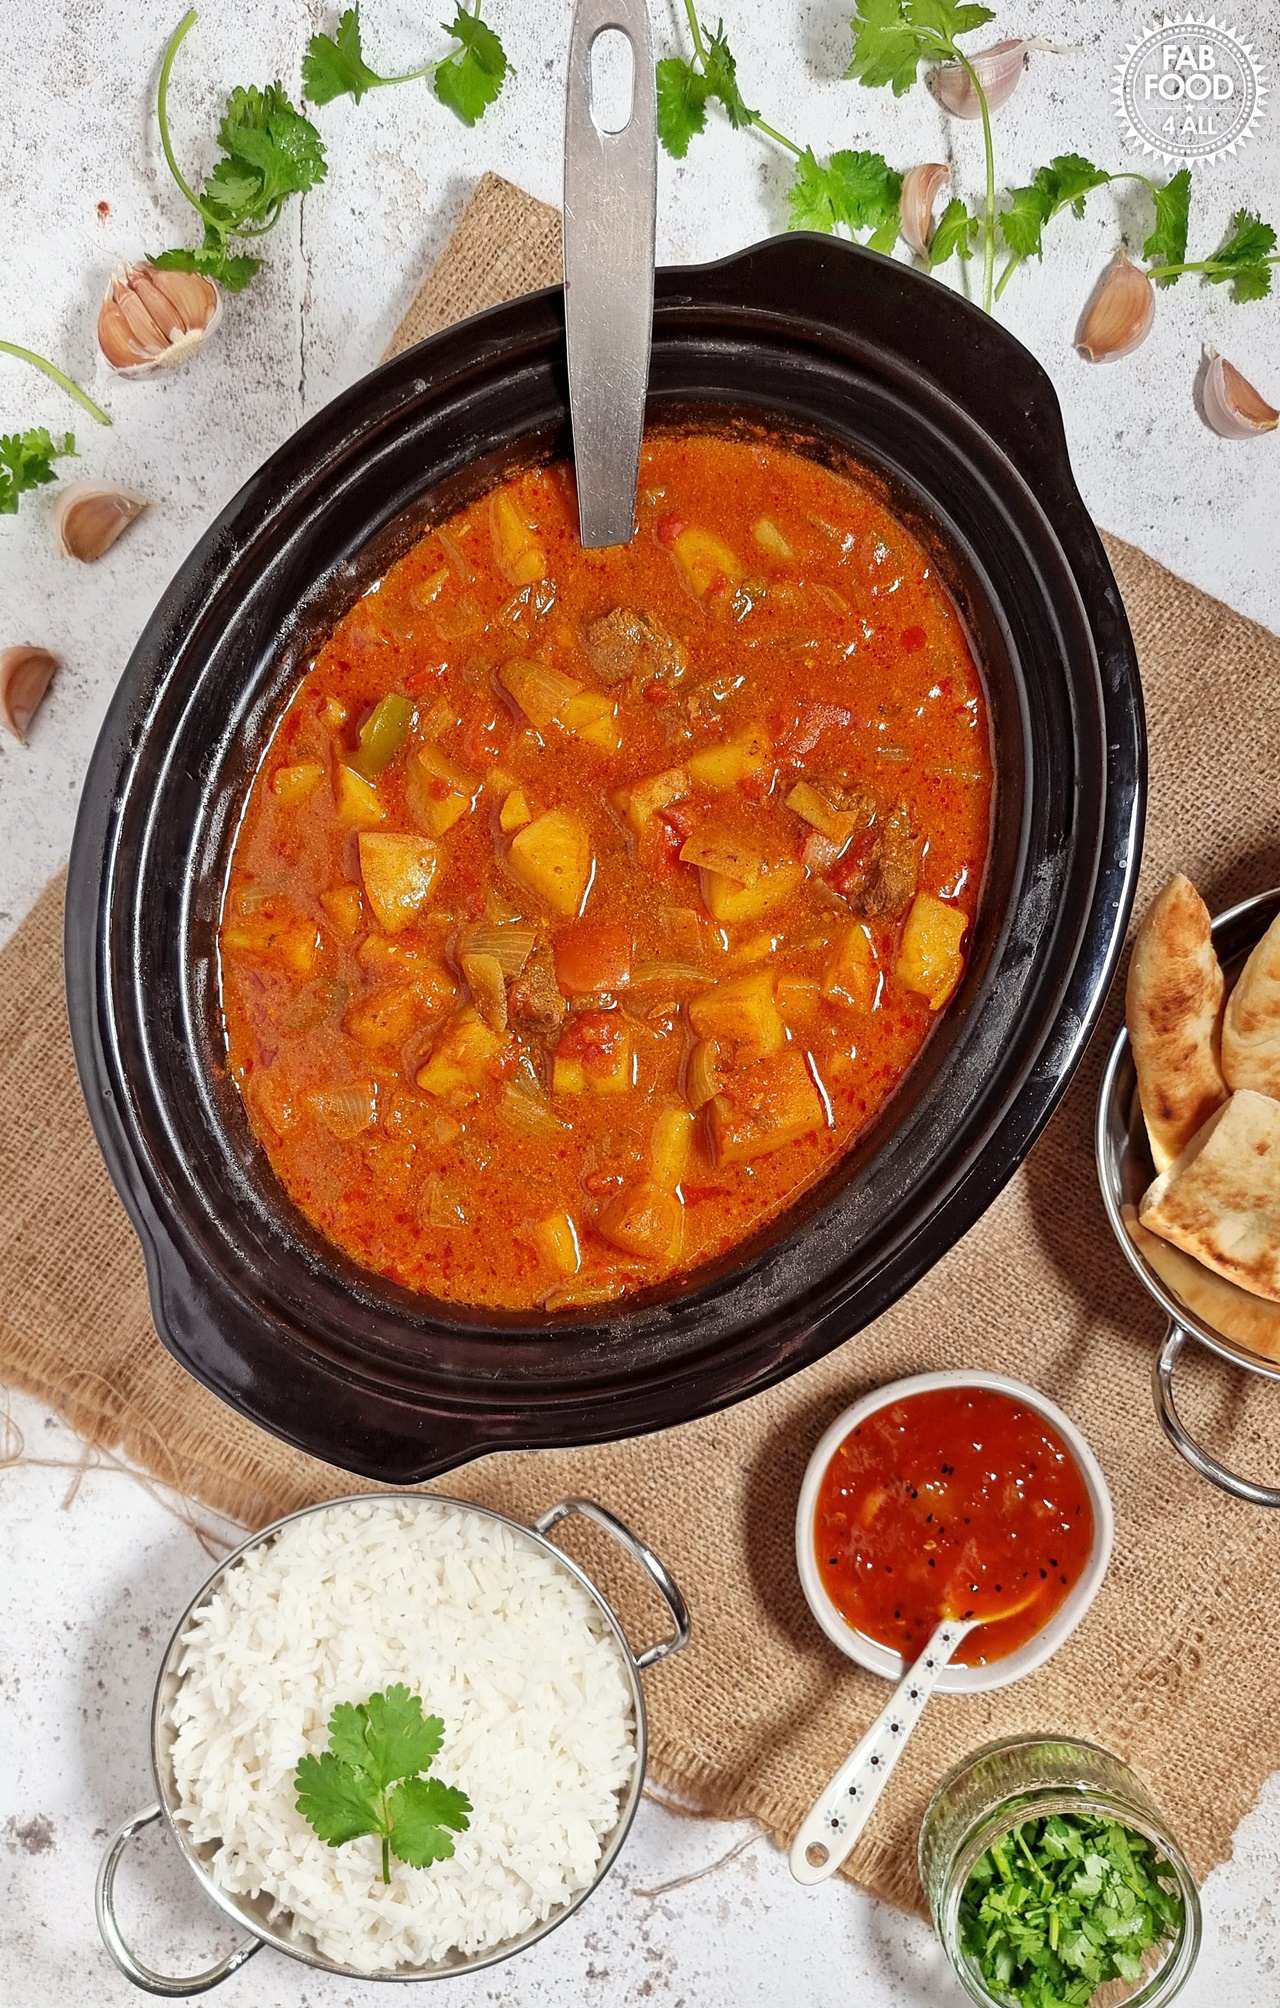 Easy Slow Cooker Beef Curry in slow cooker with naan bread, mango chutney and rice.